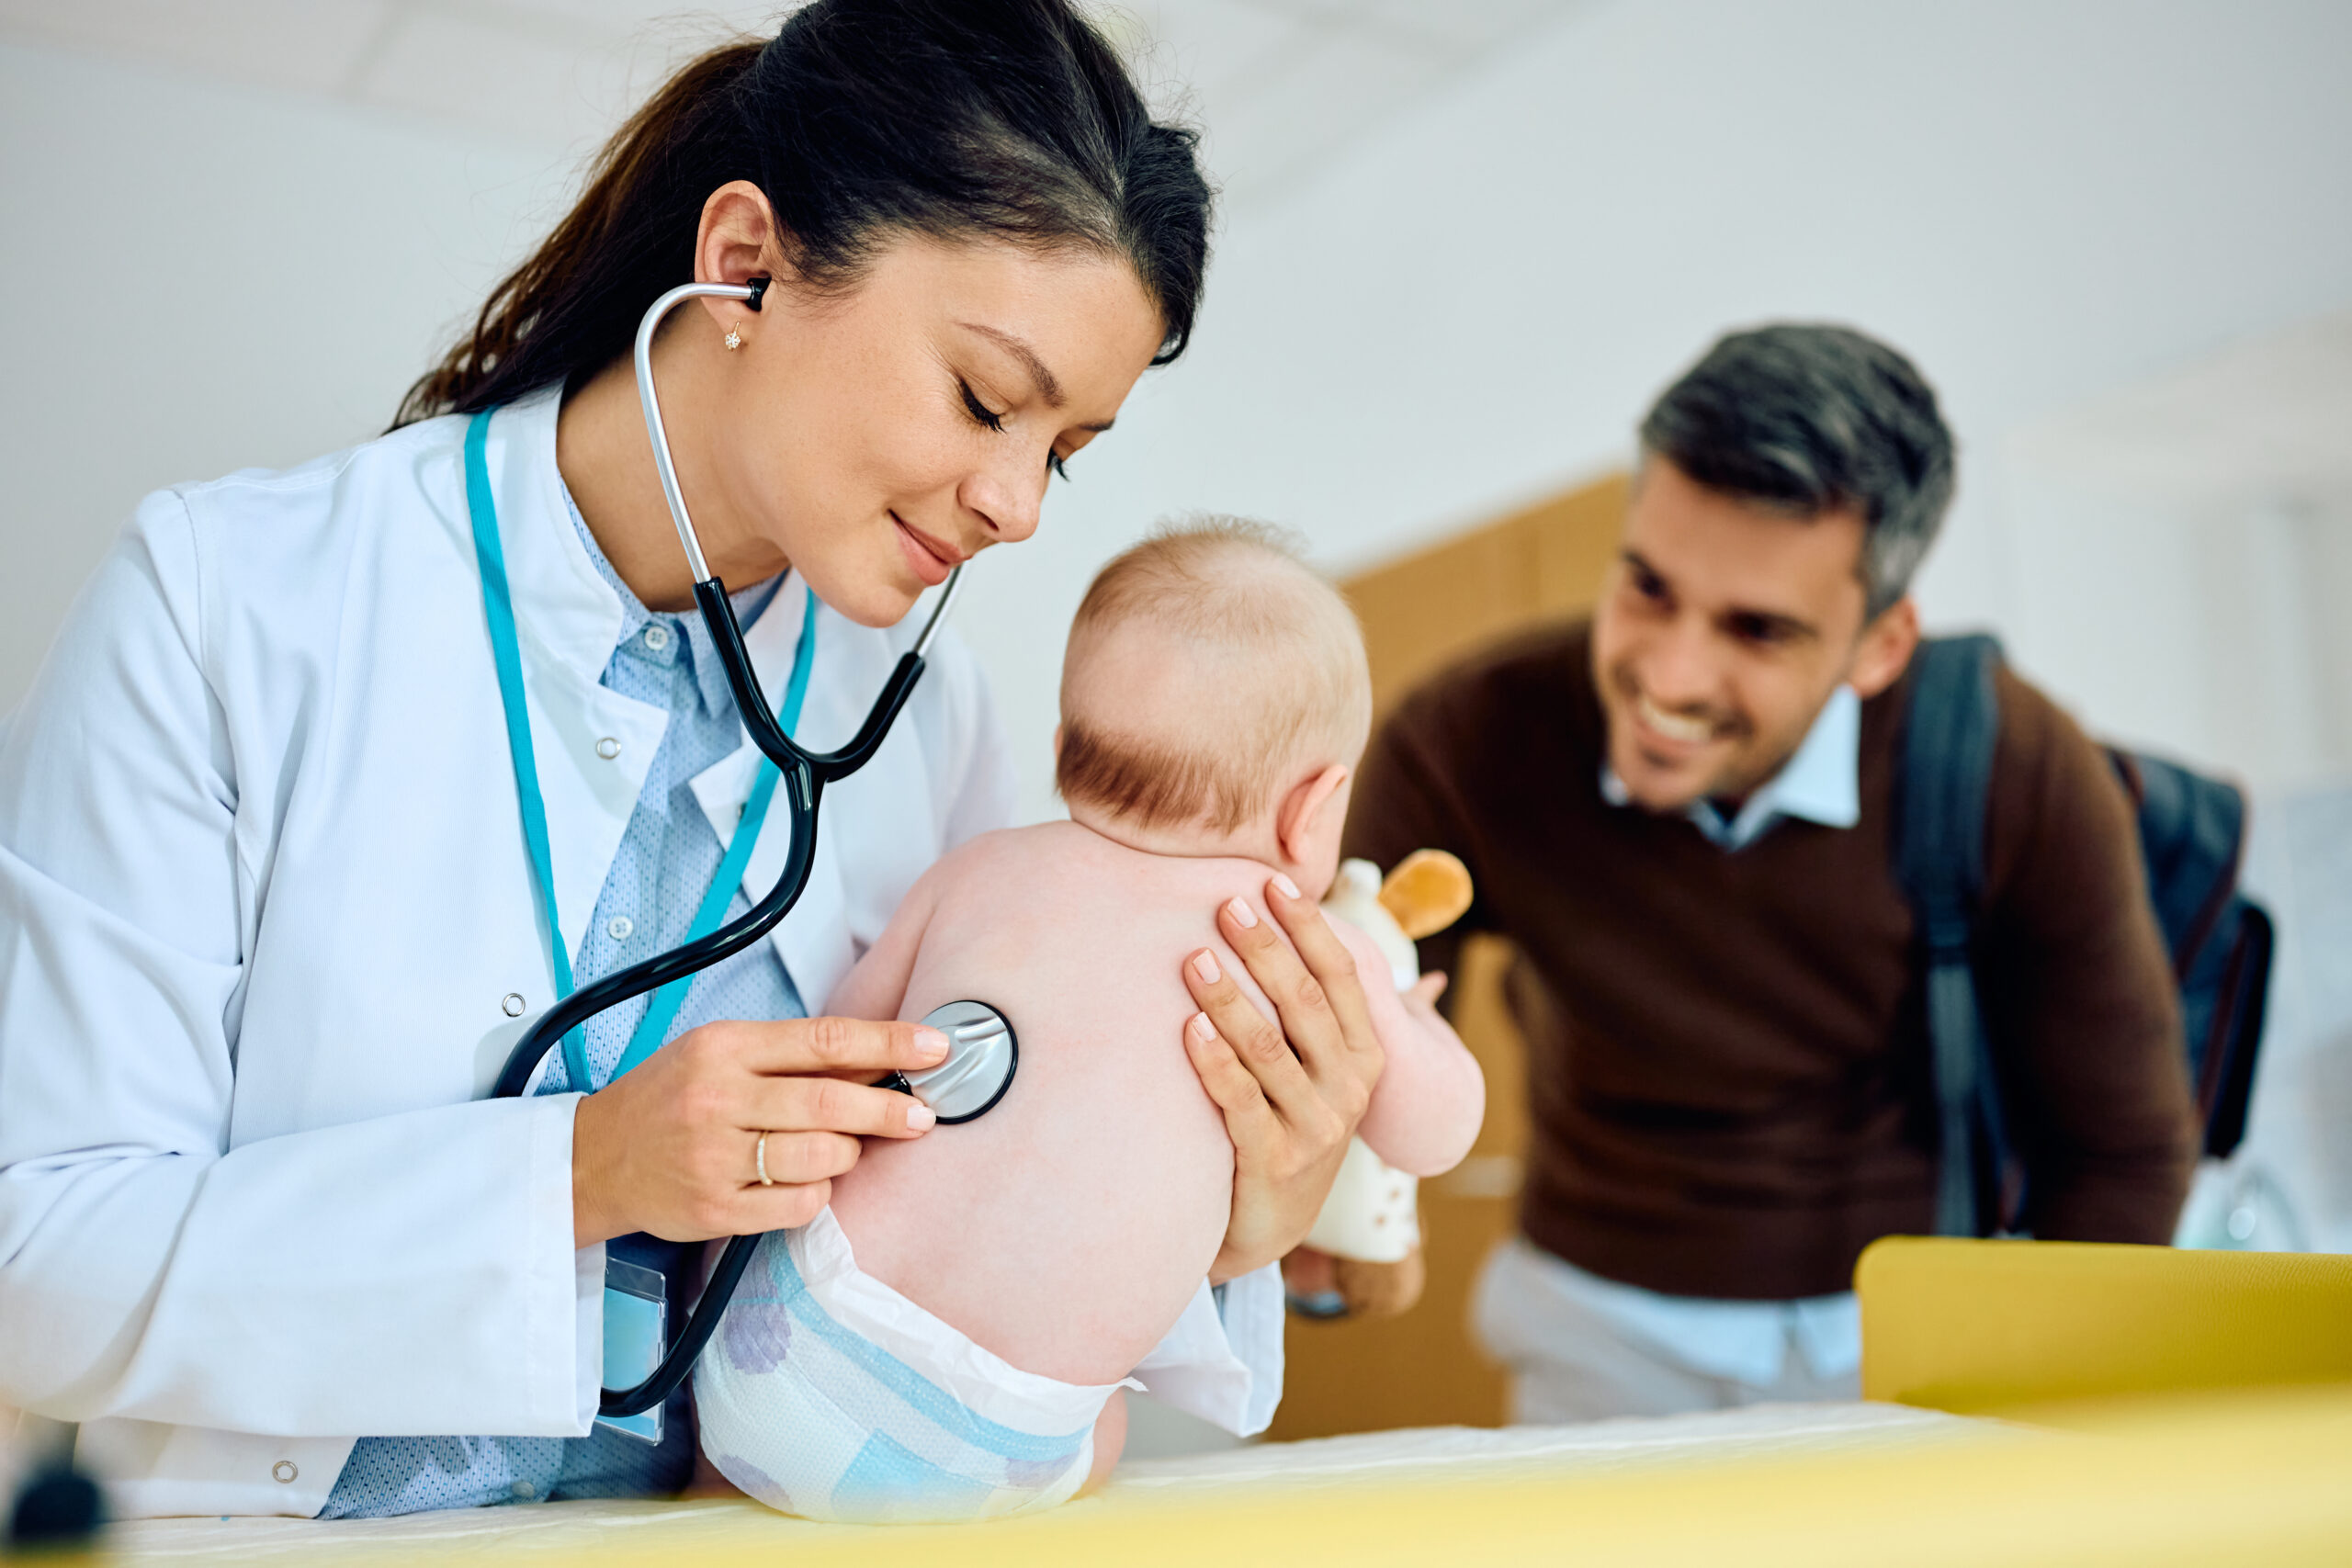 female-pediatrician-and-baby-during-medical-examin-2023-06-07-18-00-28-utc-scaled-